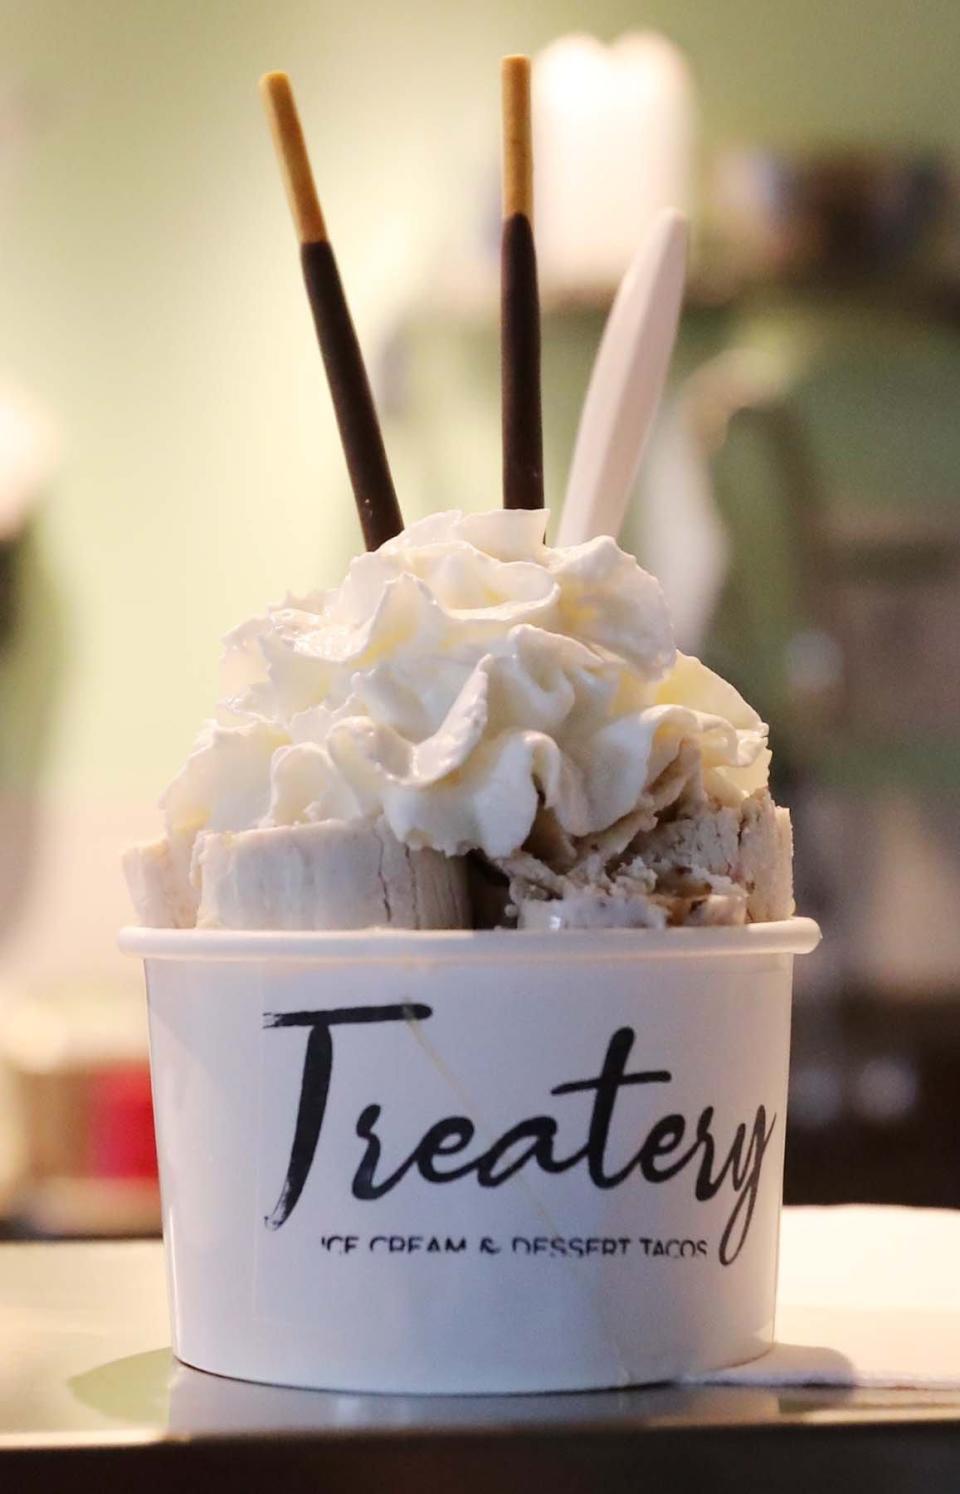 Get some rolled ice cream at the Treatery inside the Northside Marketplace in Akron. 